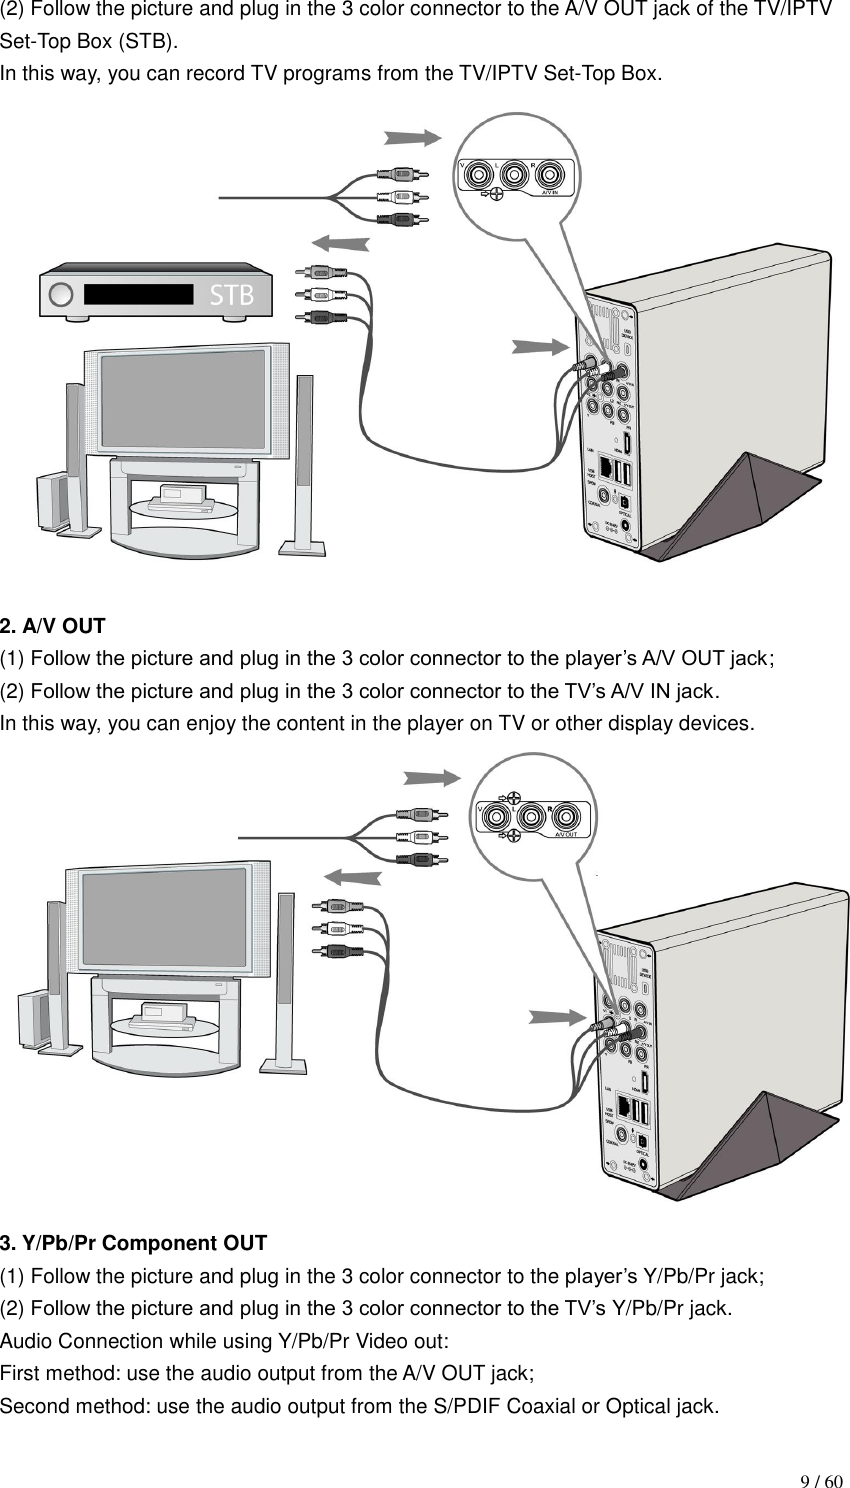                                                                                    9 / 60 (2) Follow the picture and plug in the 3 color connector to the A/V OUT jack of the TV/IPTV Set-Top Box (STB). In this way, you can record TV programs from the TV/IPTV Set-Top Box.  2. A/V OUT (1) Follow the picture and plug in the 3 color connector to the player‟s A/V OUT jack; (2) Follow the picture and plug in the 3 color connector to the TV‟s A/V IN jack. In this way, you can enjoy the content in the player on TV or other display devices.  3. Y/Pb/Pr Component OUT (1) Follow the picture and plug in the 3 color connector to the player‟s Y/Pb/Pr jack; (2) Follow the picture and plug in the 3 color connector to the TV‟s Y/Pb/Pr jack. Audio Connection while using Y/Pb/Pr Video out: First method: use the audio output from the A/V OUT jack;   Second method: use the audio output from the S/PDIF Coaxial or Optical jack. 